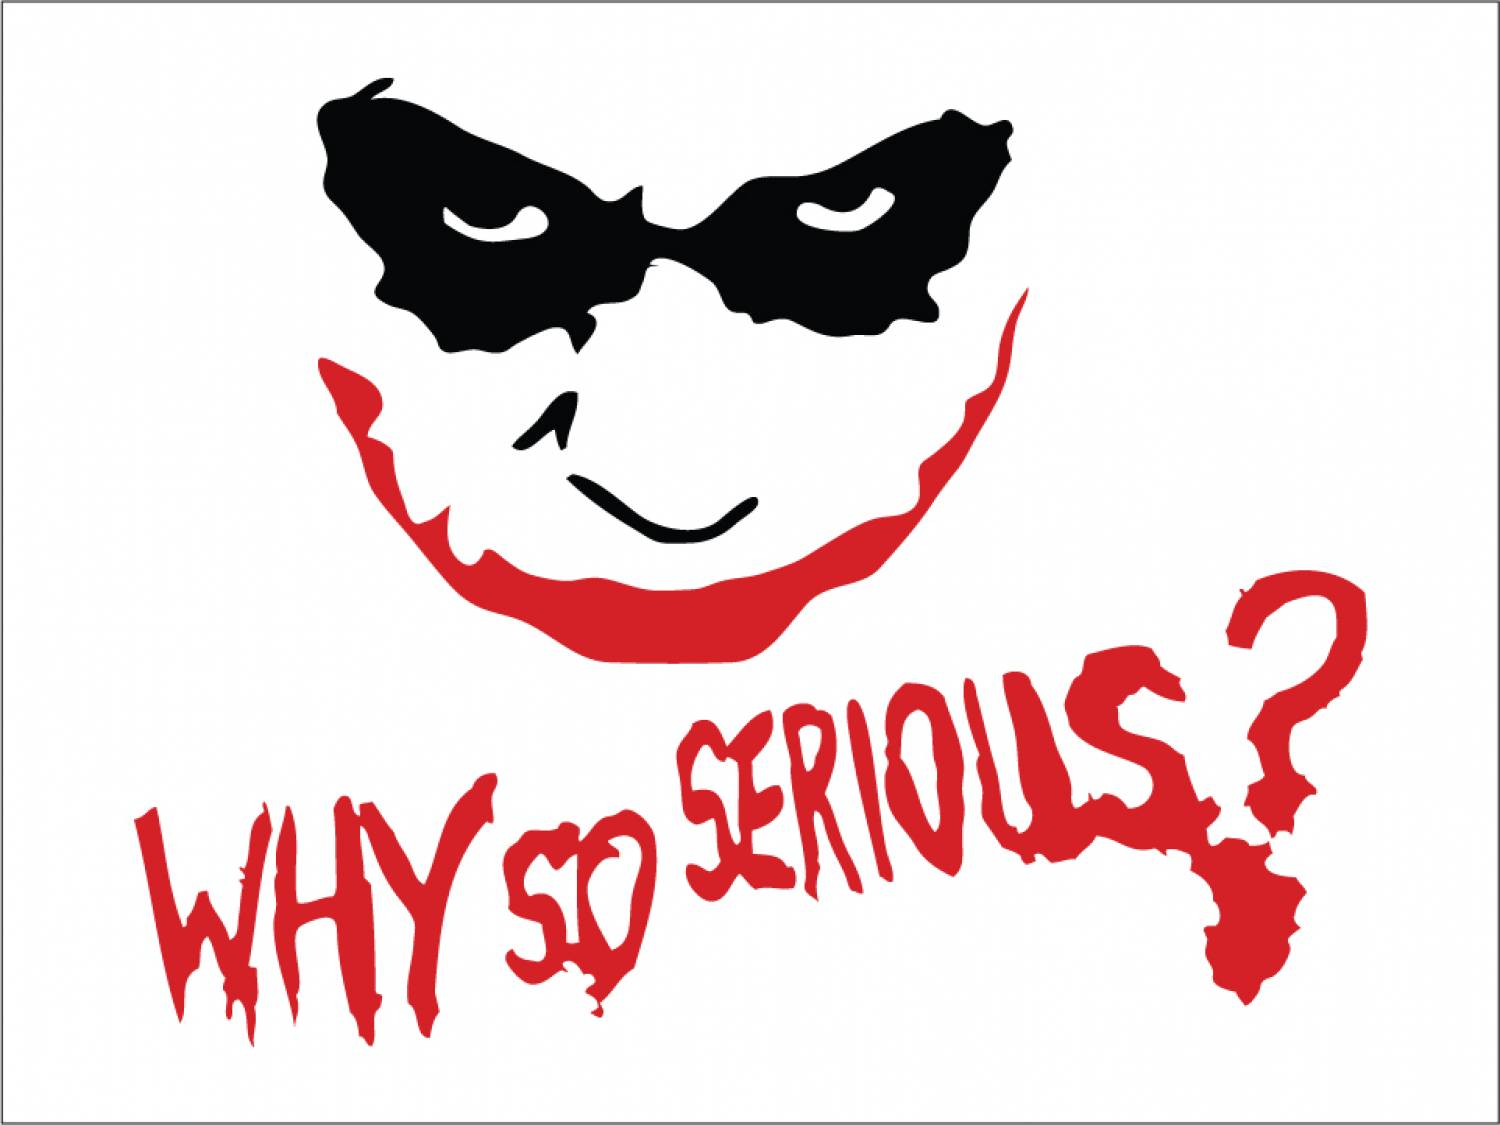 Why So Serious Wallpaper